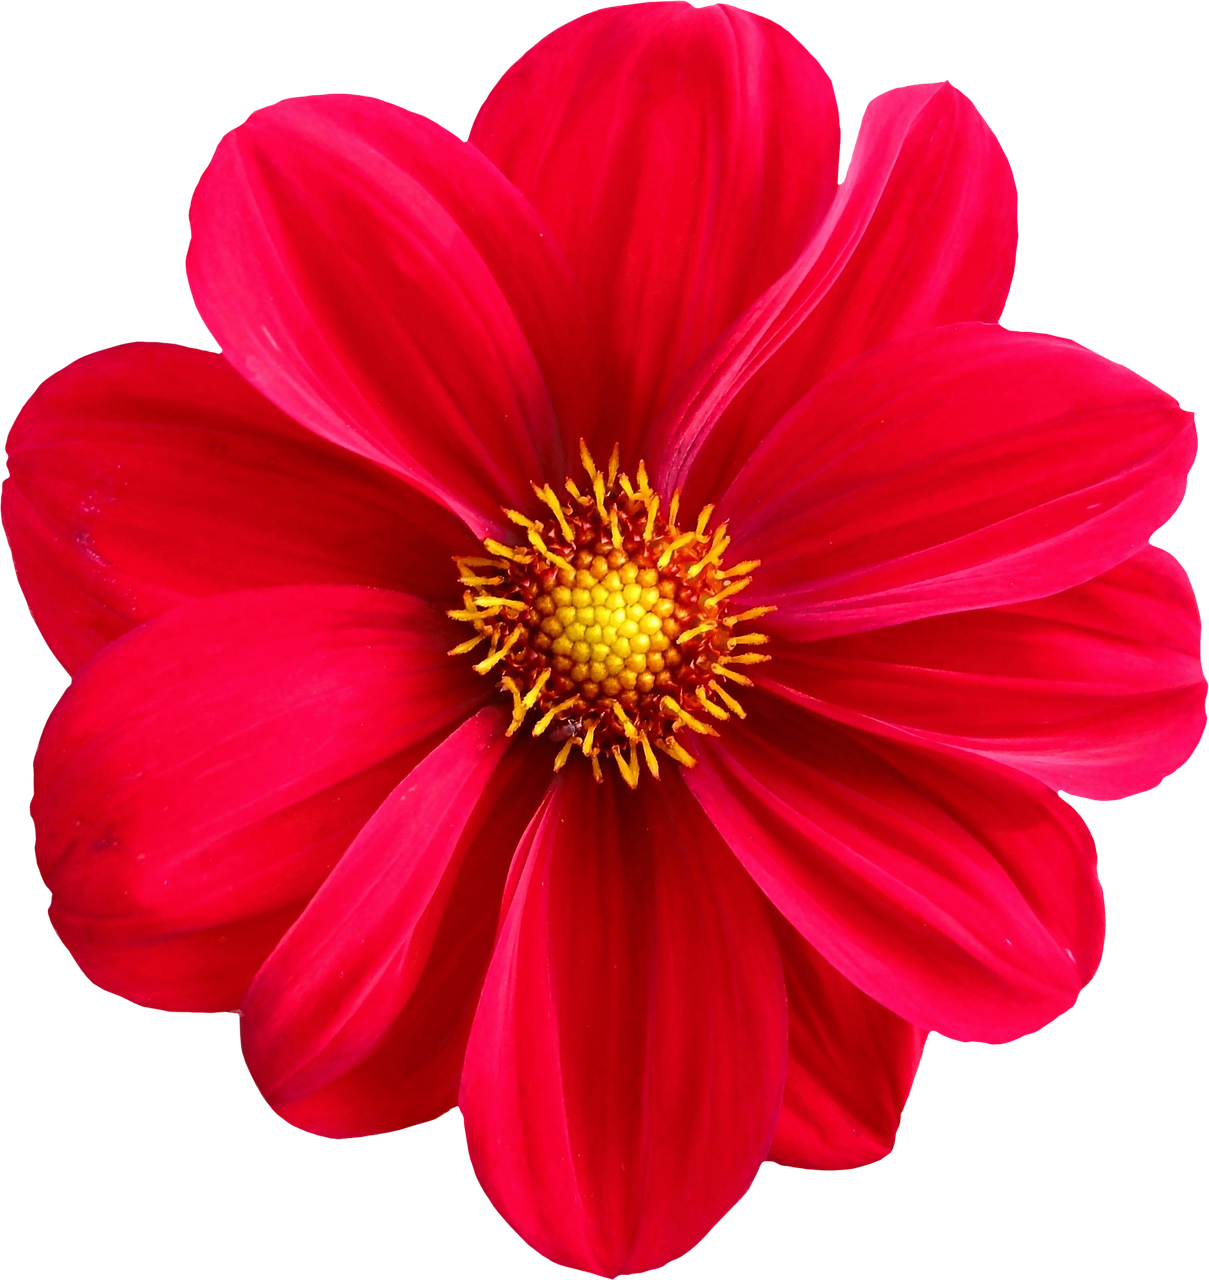 Vibrant Red Dahlia Flower PNG